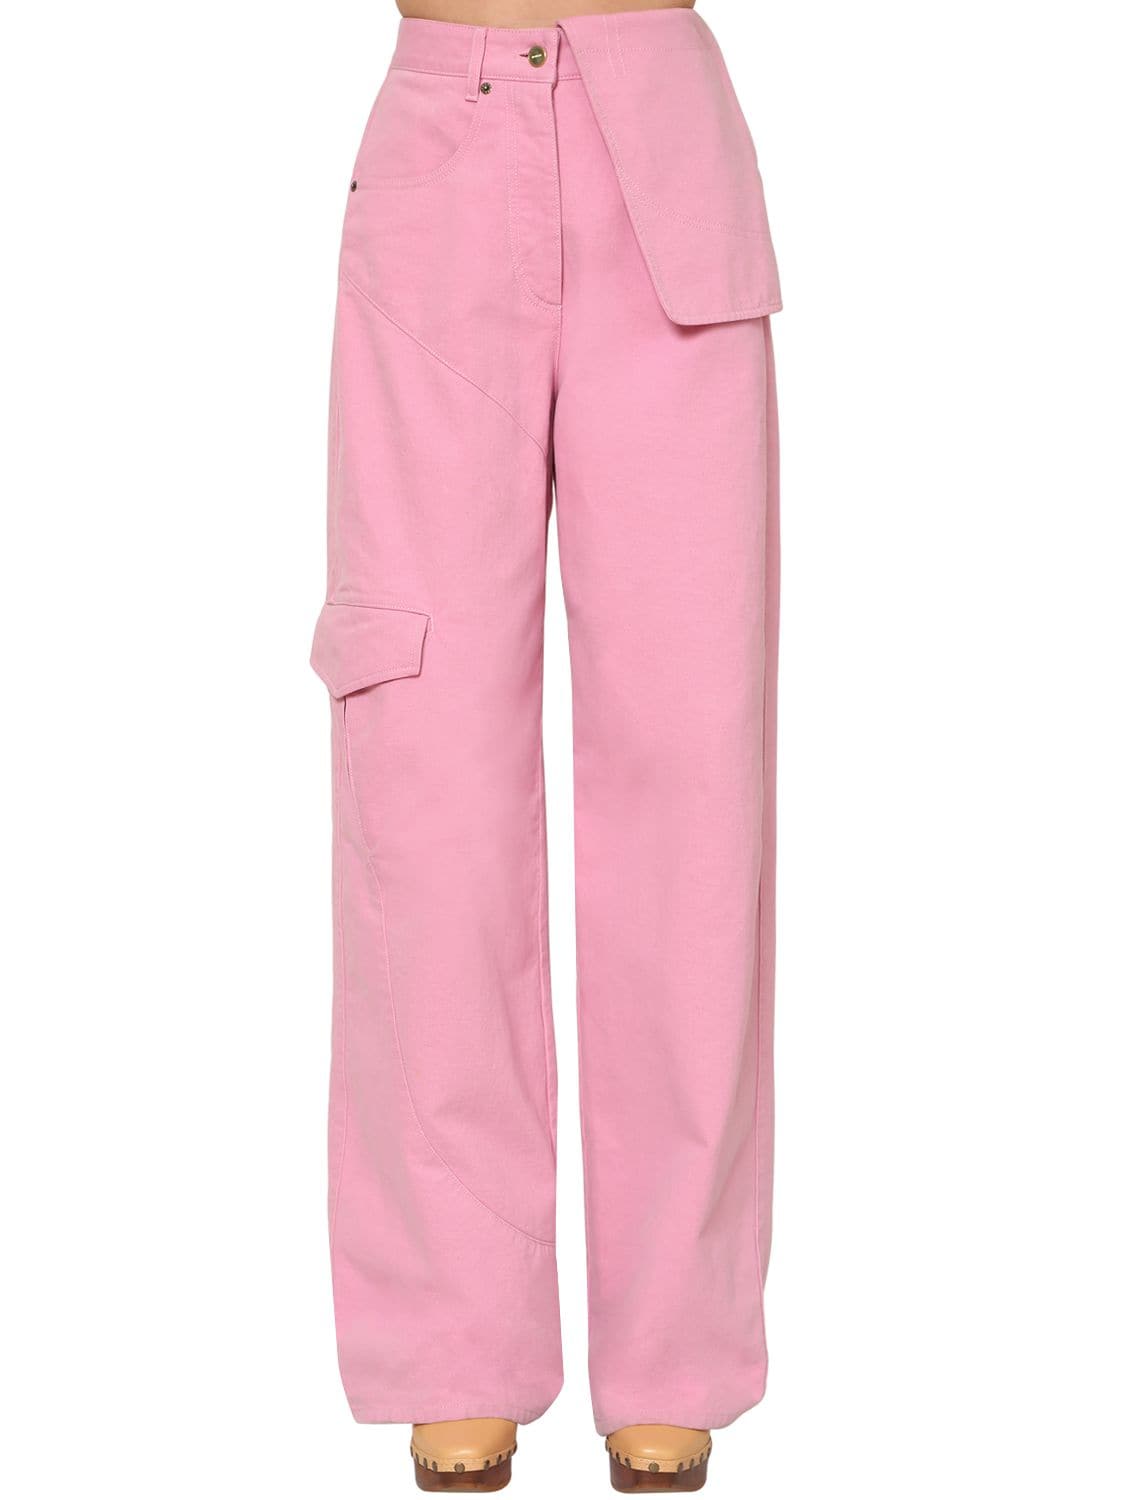 pink cargo jeans